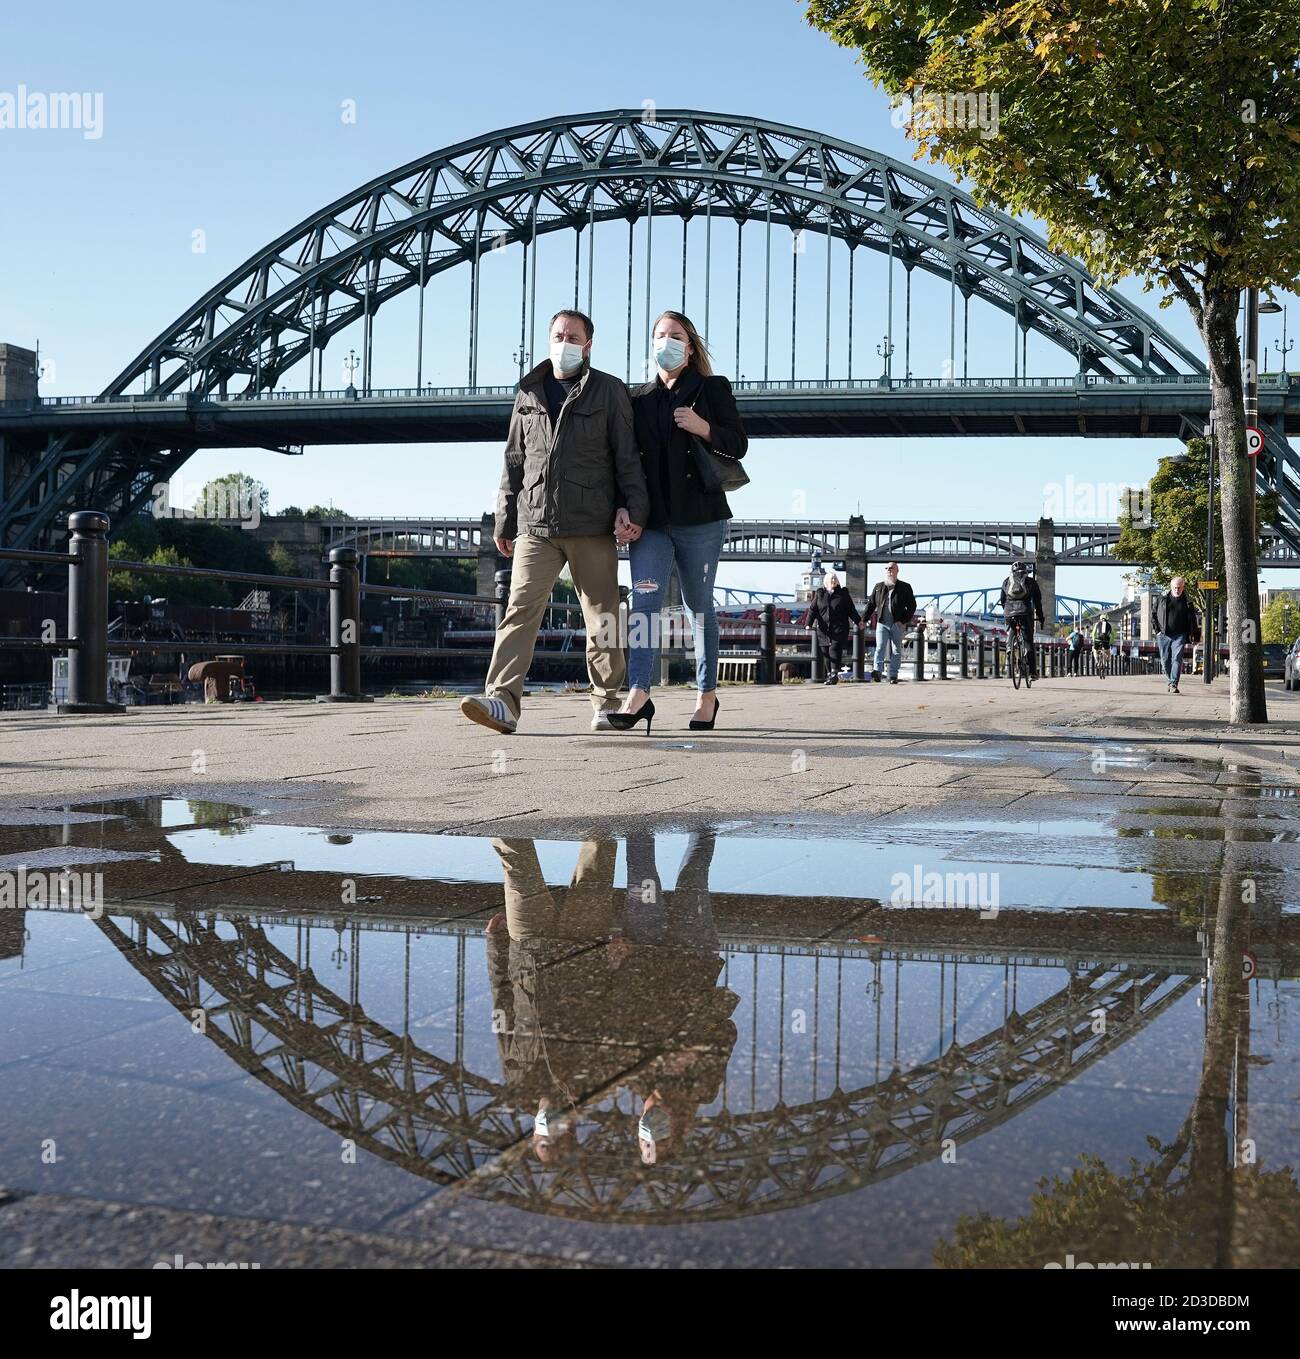 People wearing masks walking near the Tyne Bridge in Newcastle. Ministers are considering imposing fresh regional restrictions amid a spike in coronavirus cases in northern England. Stock Photo